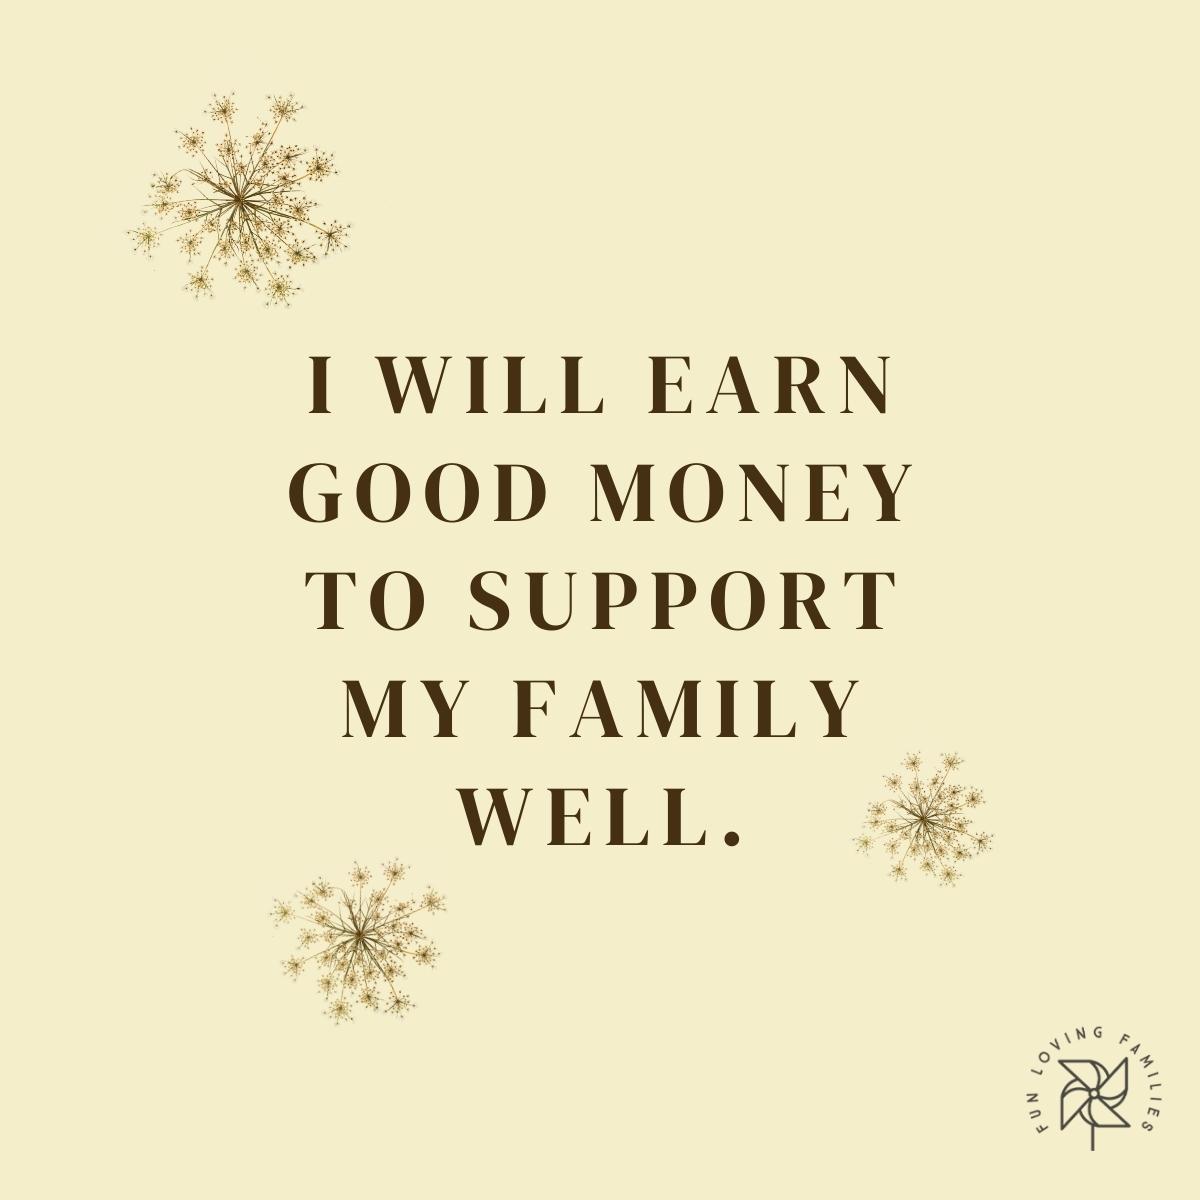 I will earn good money to support my family well affirmation